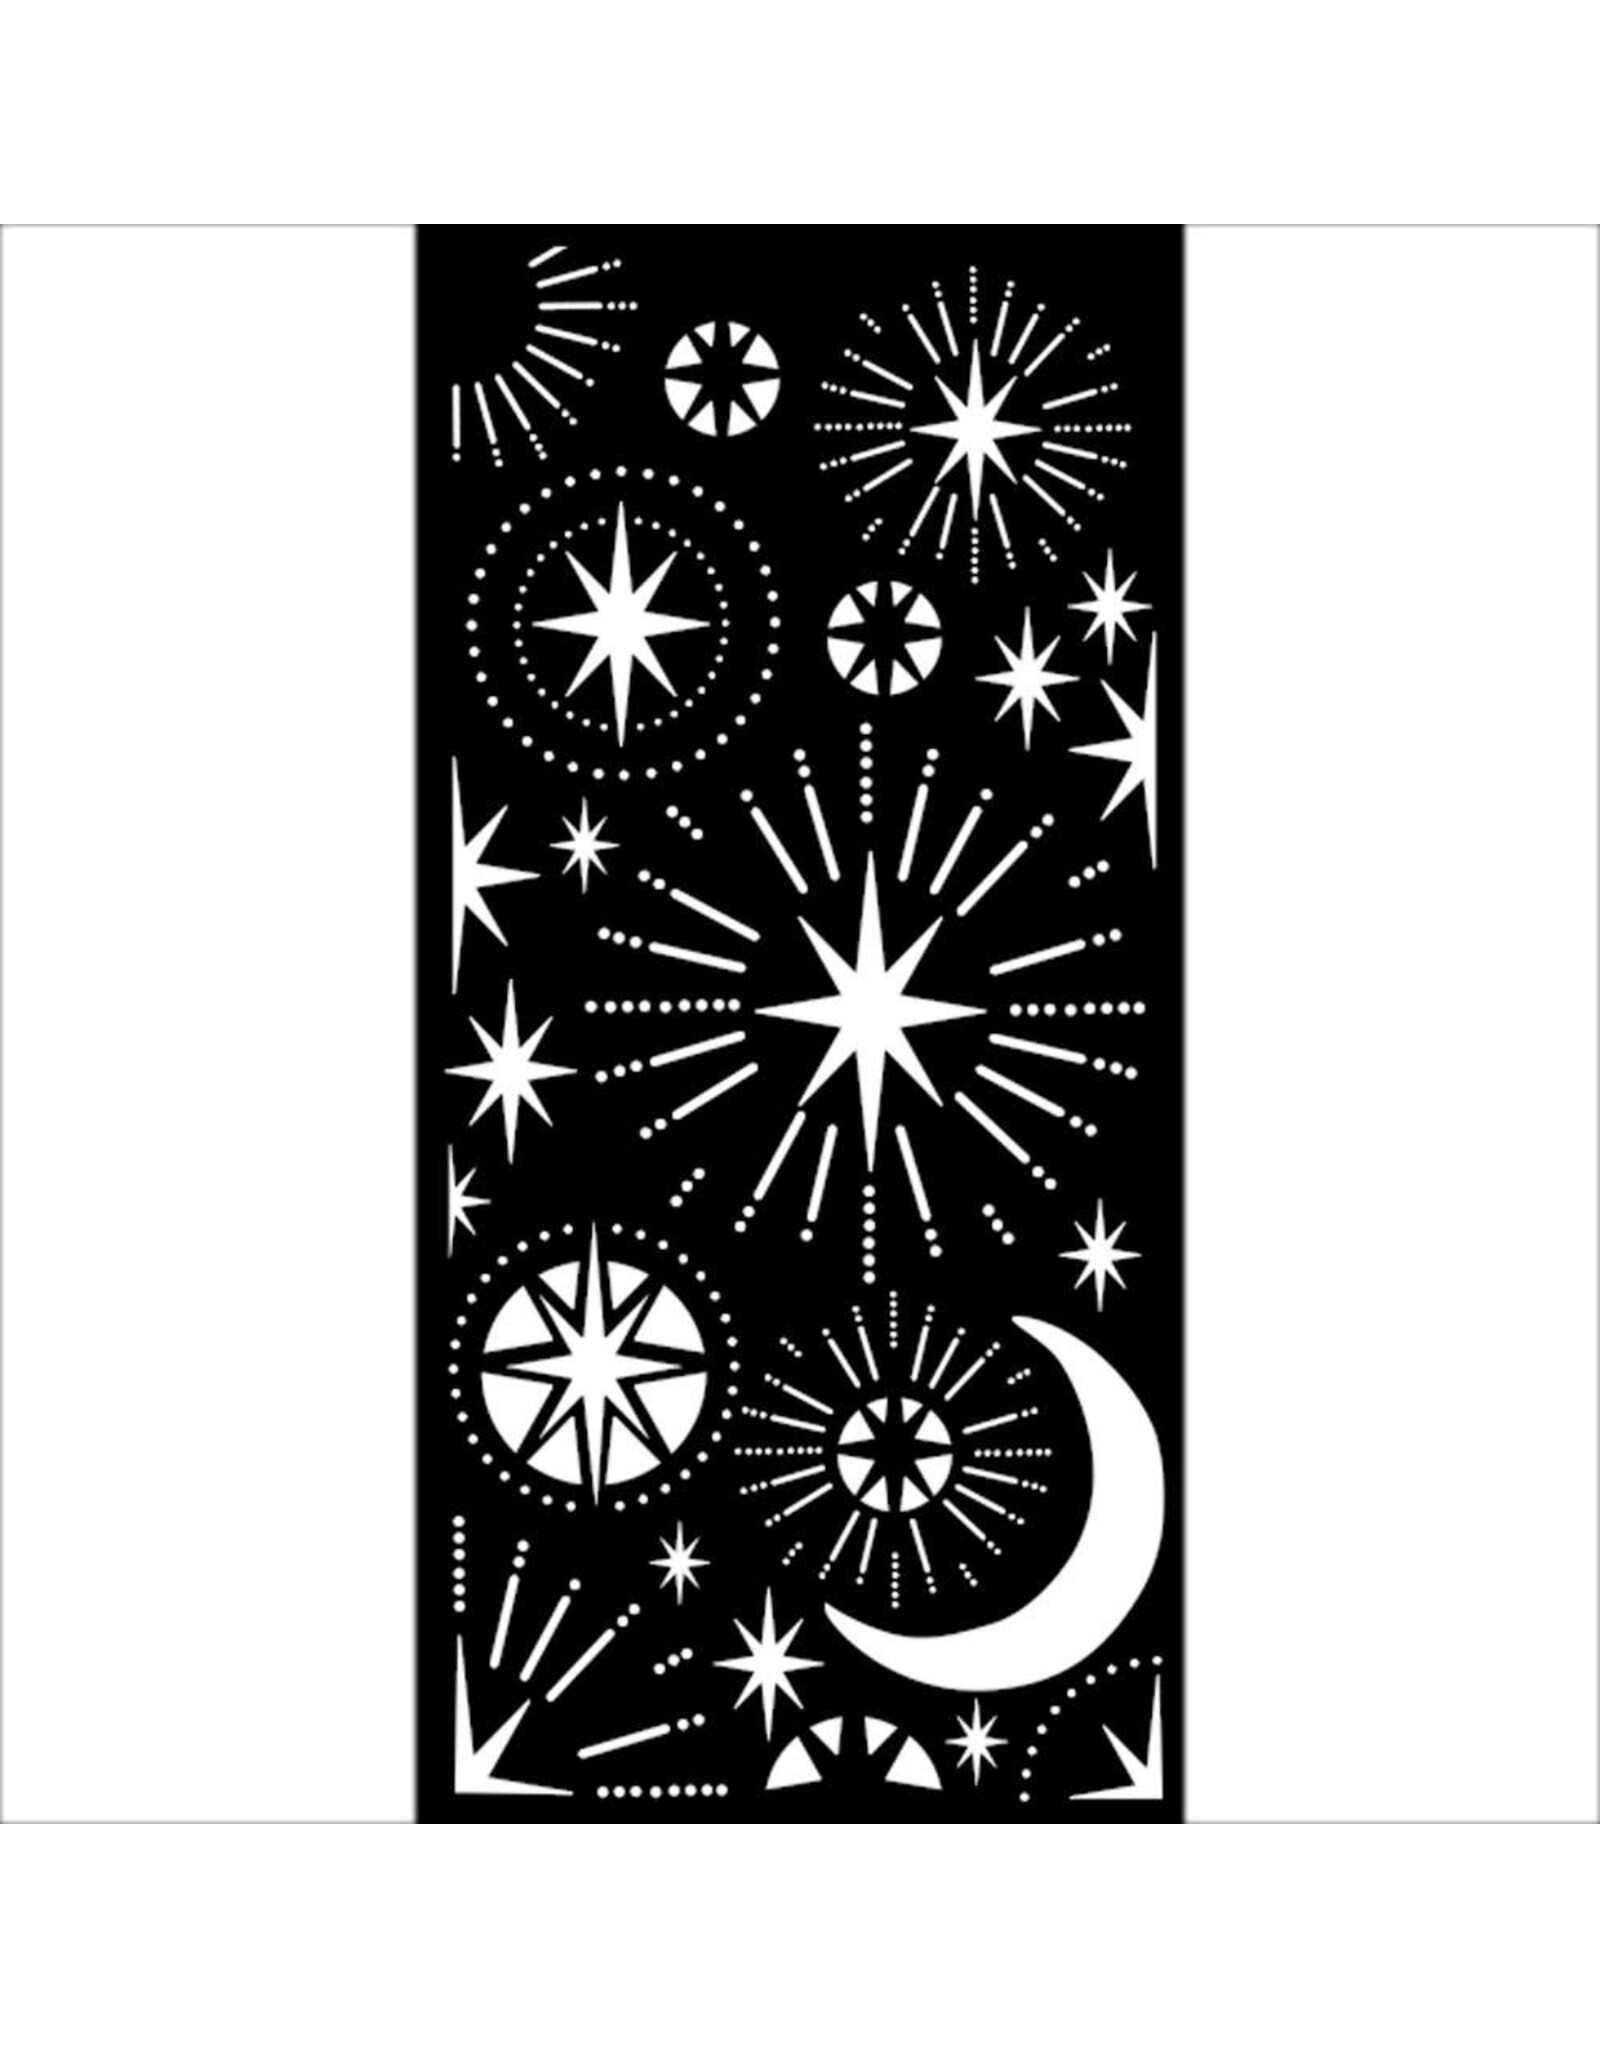 STAMPERIA STAMPERIA CHRISTMAS STARS AND MOON 12x25 STENCIL